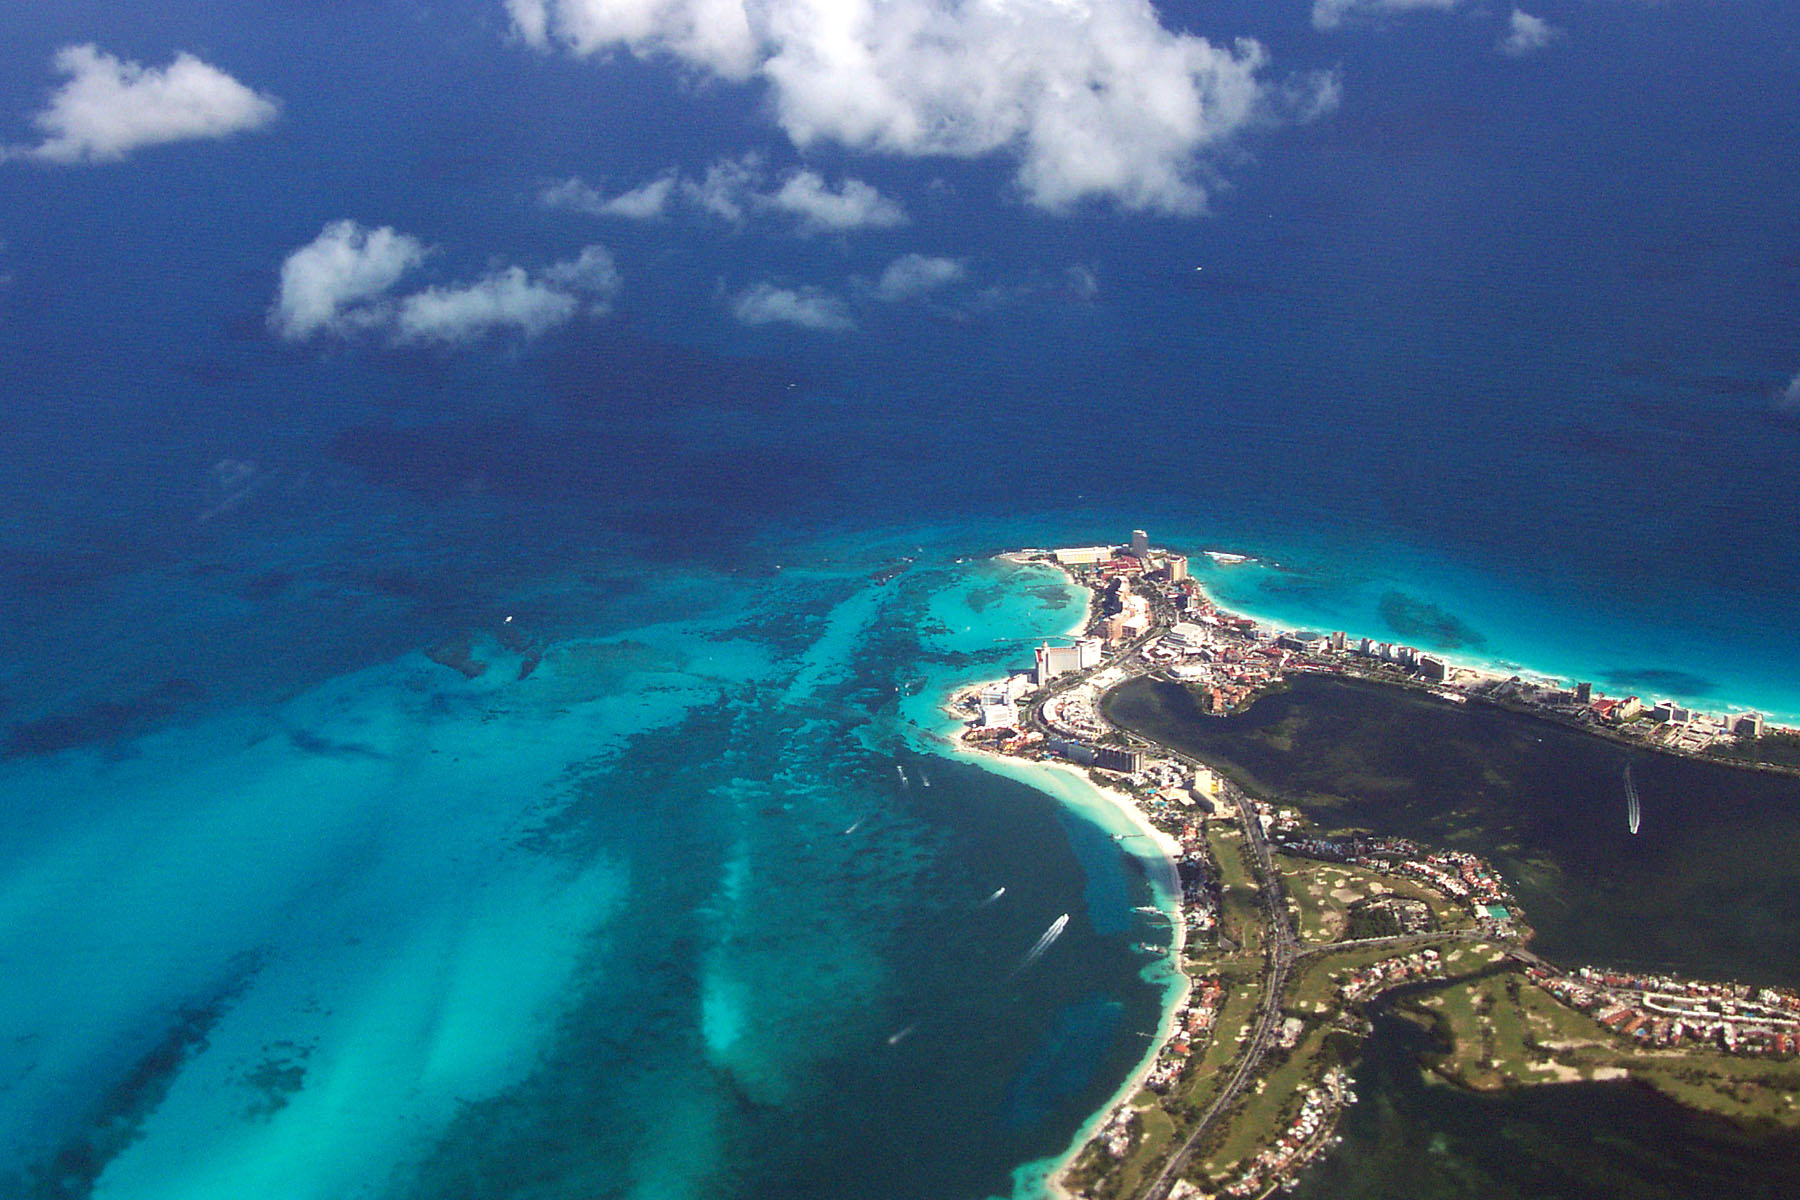 Calgary to Cancun, Mexico – $389 CAD roundtrip including taxes | Non-stop flights w/ Westjet